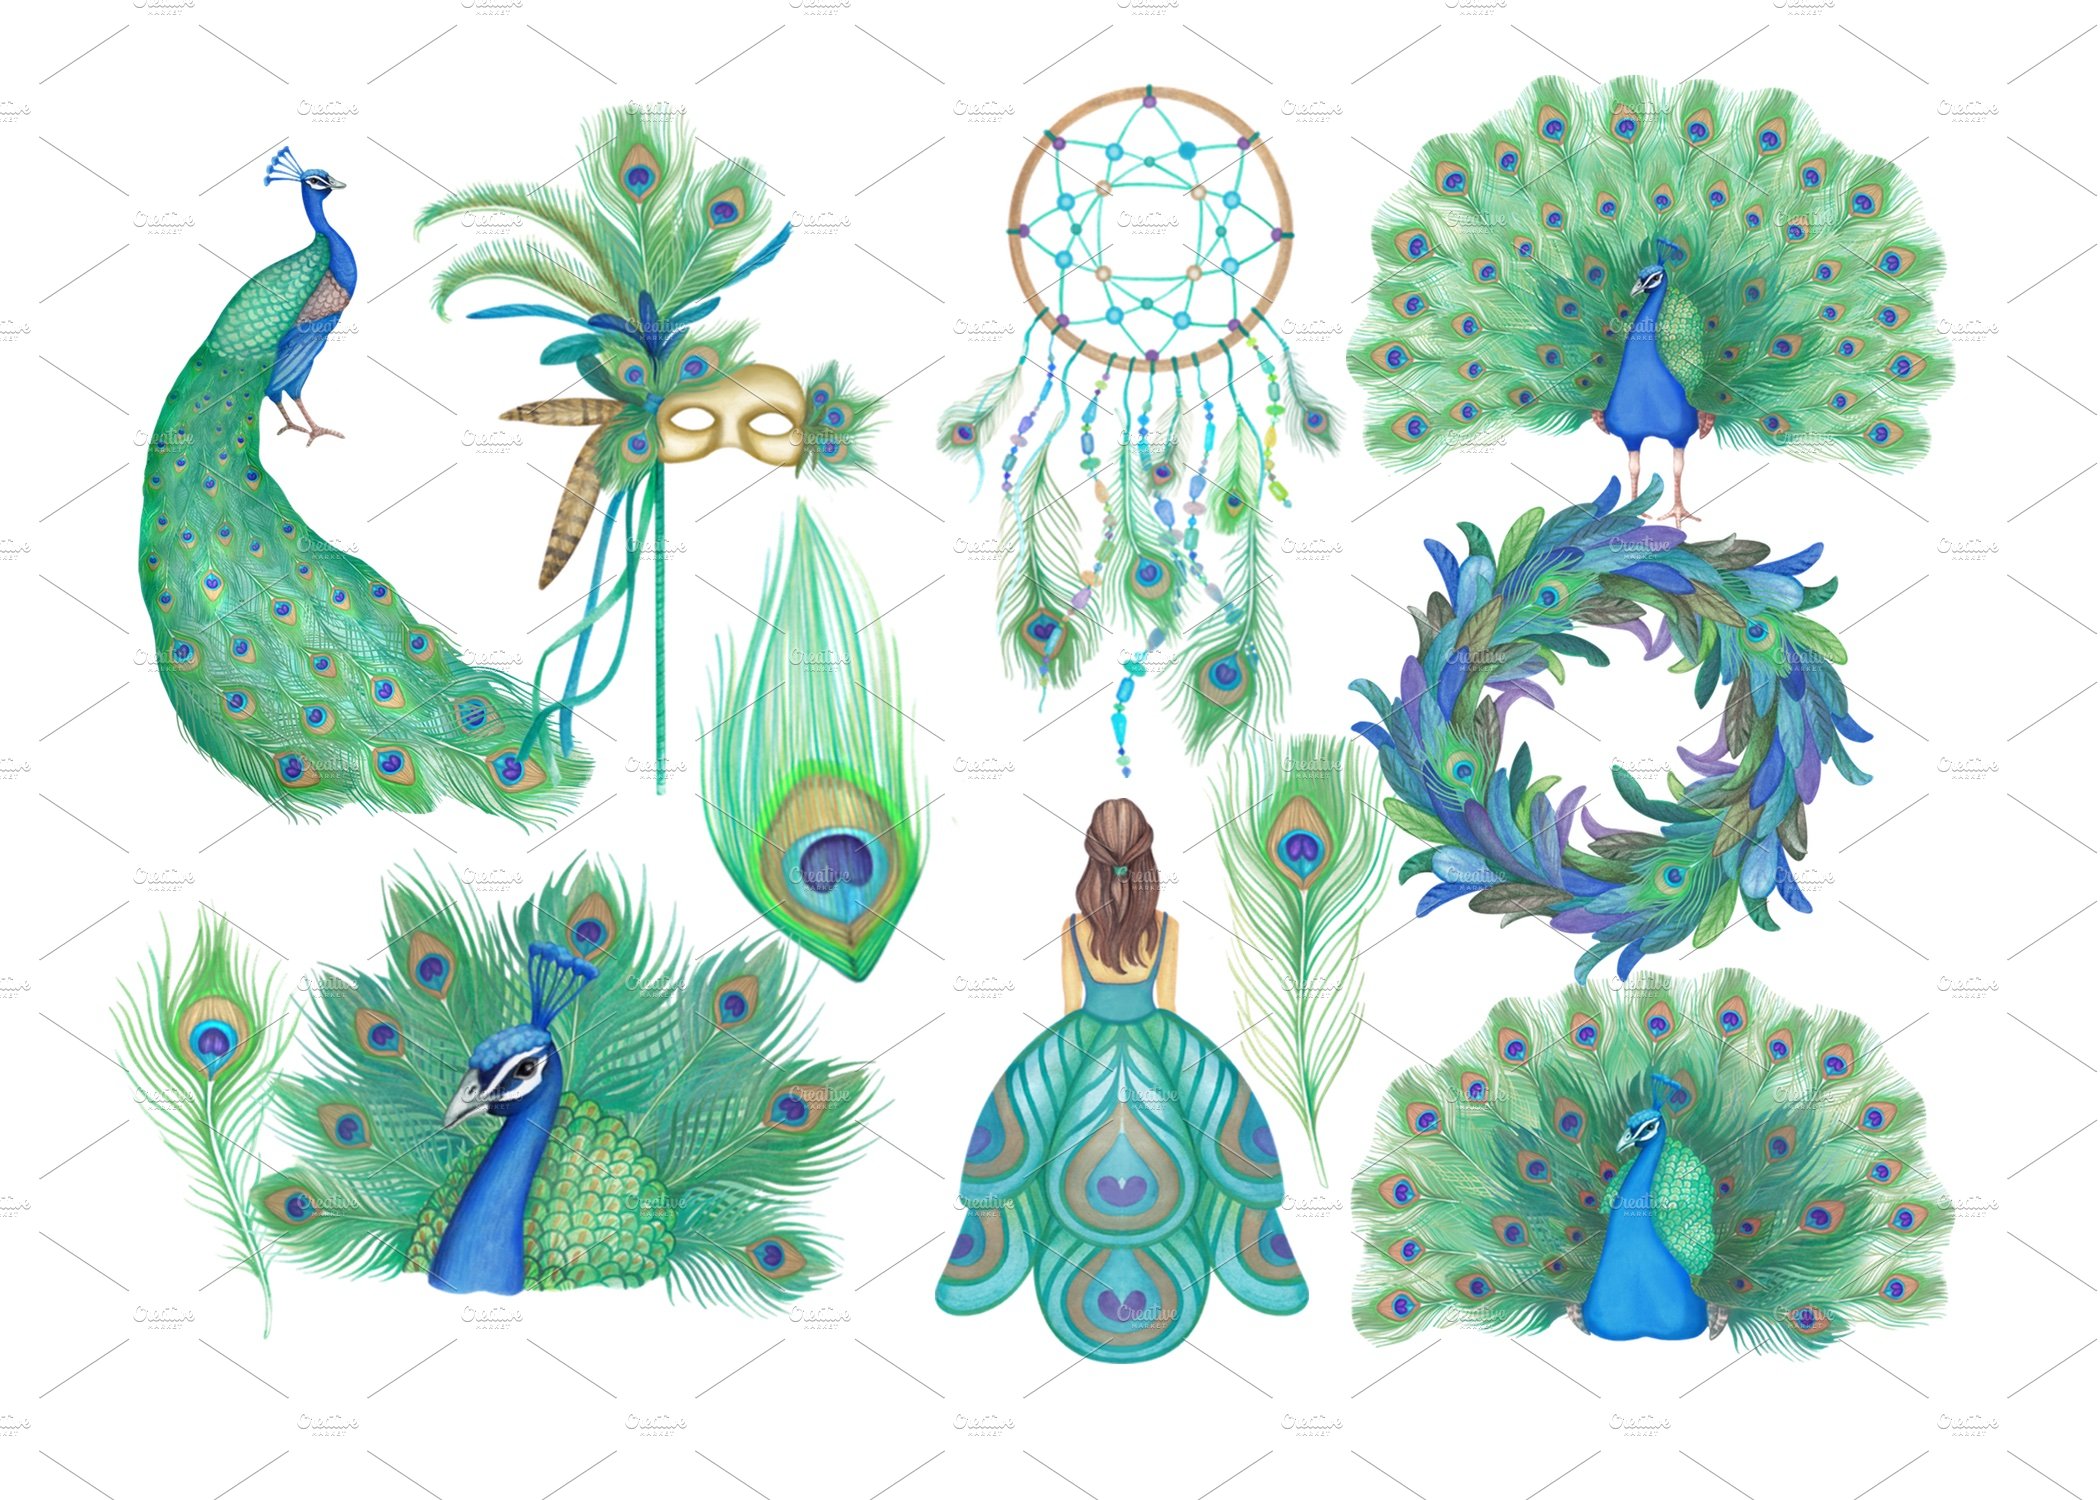 Watercolor Peacock Clipart Images preview image.